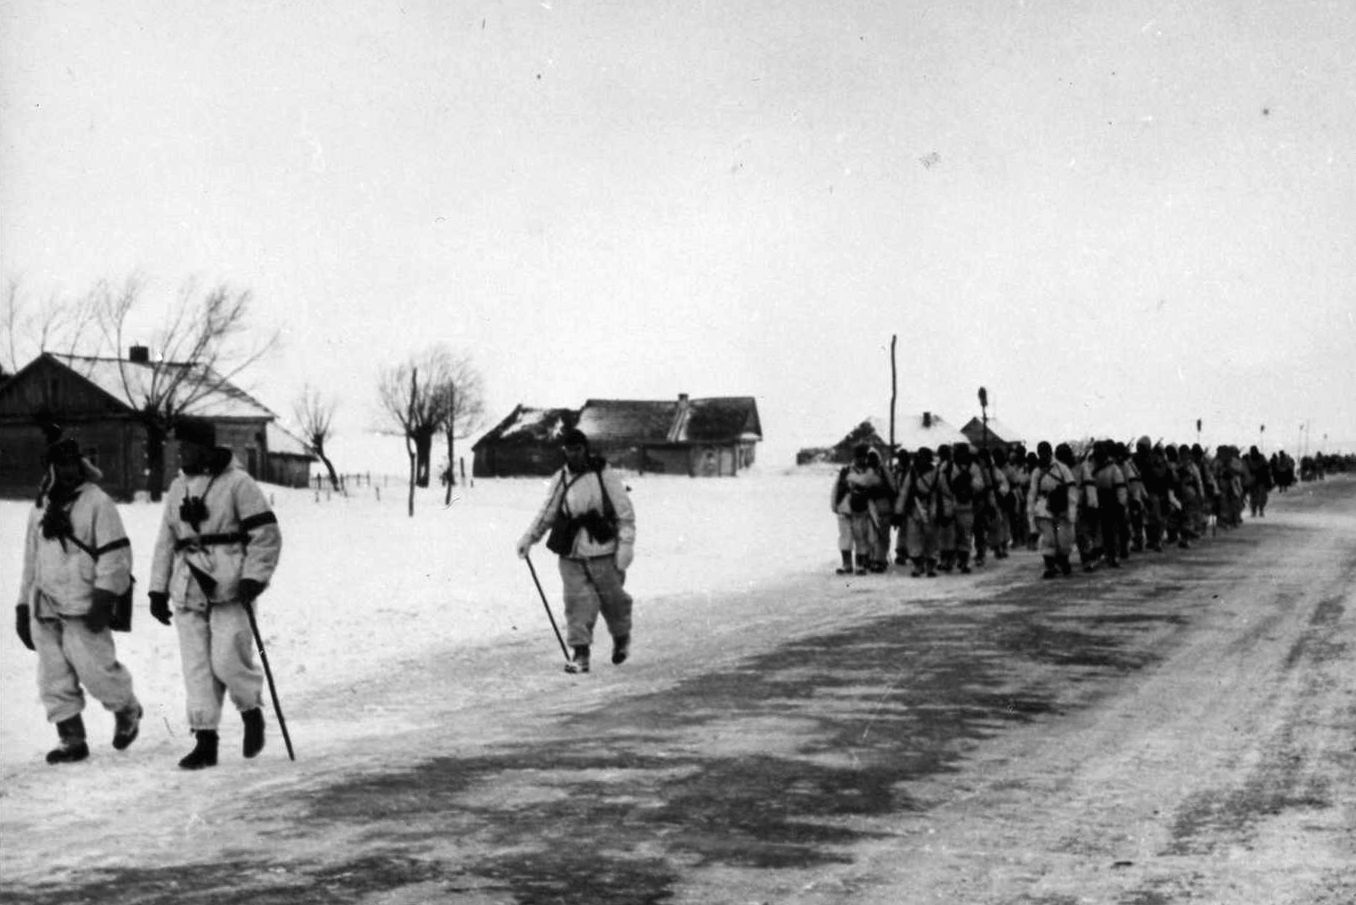 Advancing through a deserted Russian town, German soldiers trek eastward toward the enemy and their crushing defeat at Stalingrad. Although their momentum was halted, the Germans still delivered a bloody repulse to Soviet Operation Gallop. 